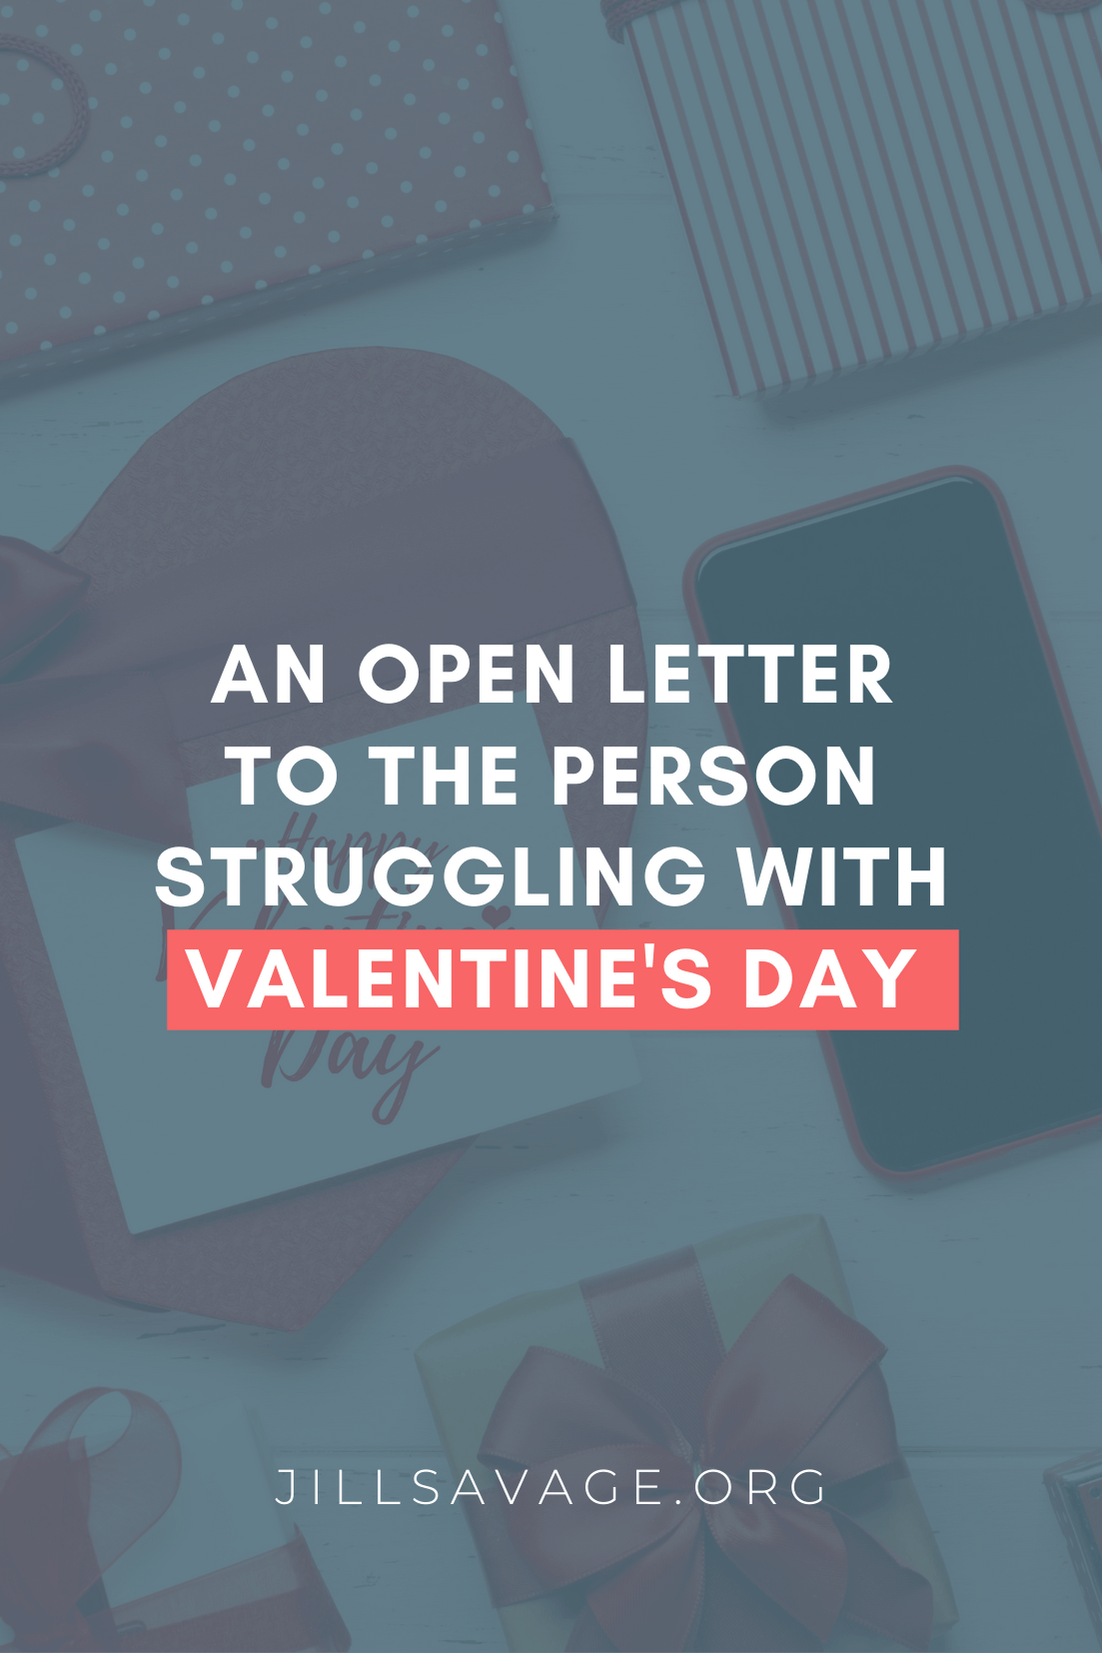 An Open Letter to the Person Struggling with Valentine’s Day